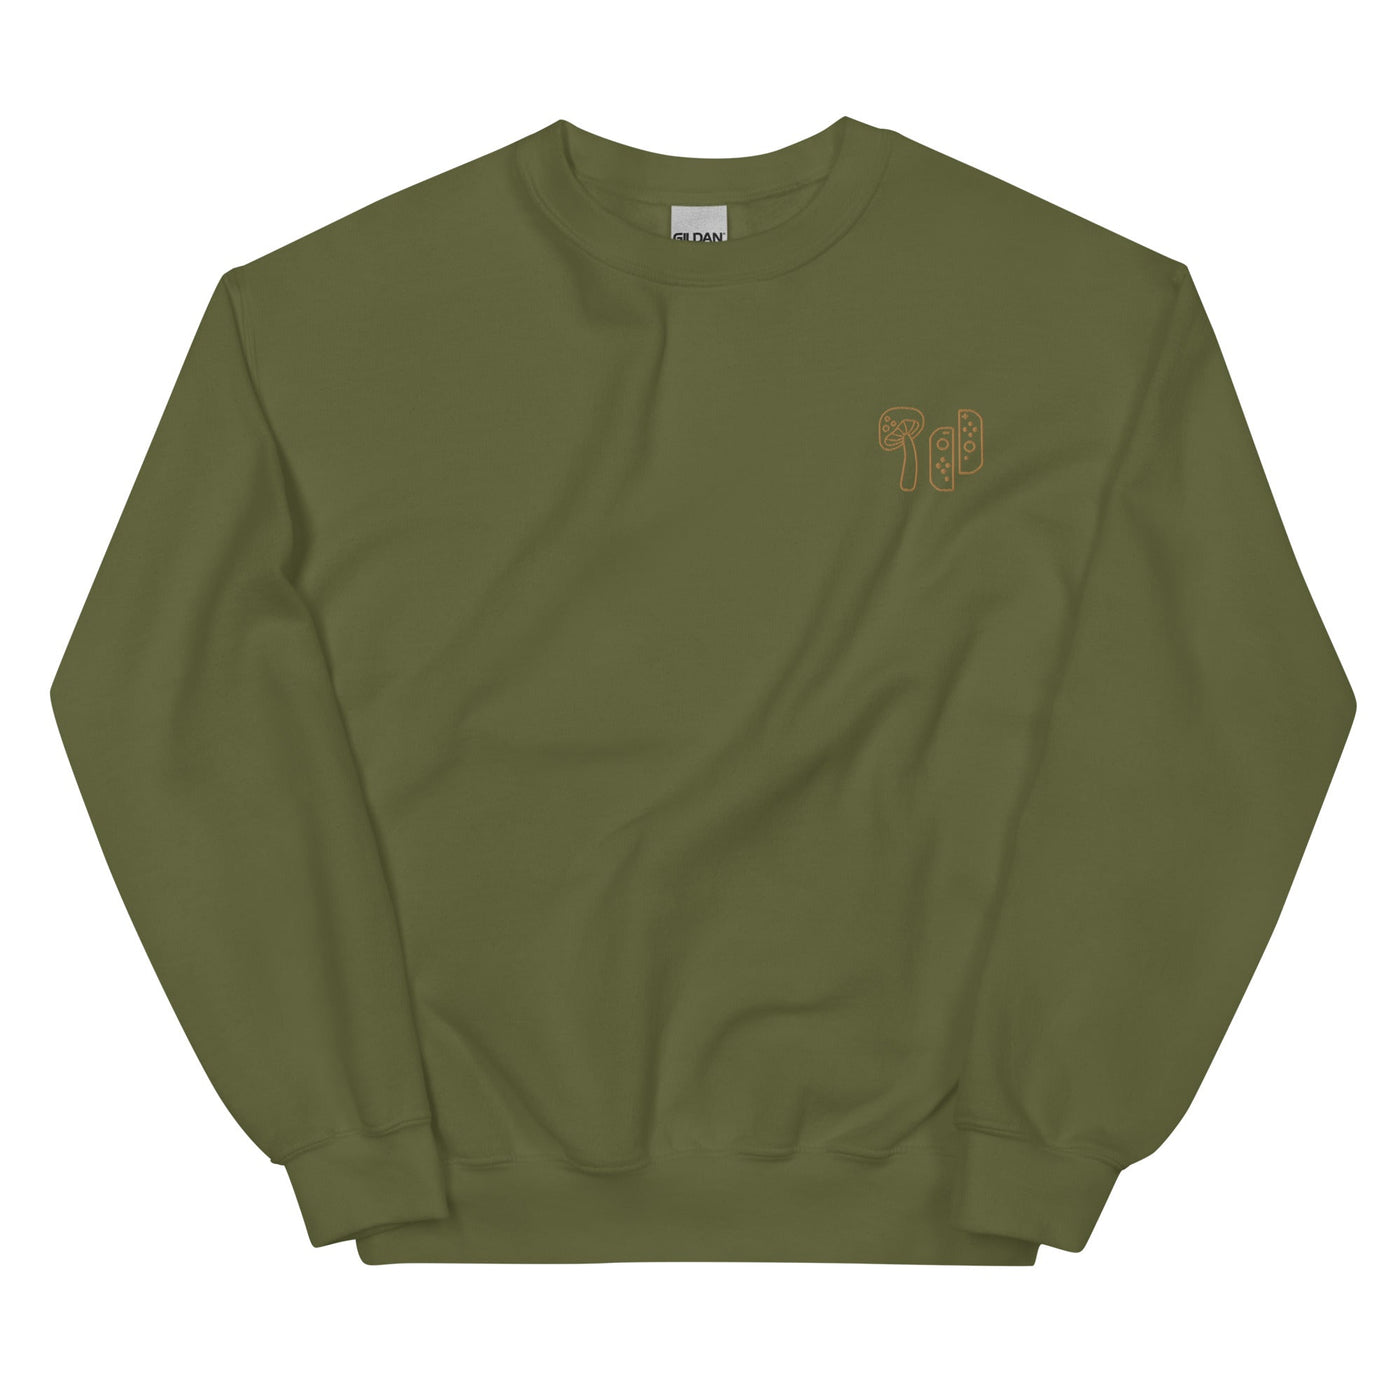 Mushroom & Switch | Embroidered Unisex Sweatshirt | Cozy Gamer Threads and Thistles Inventory Military Green S 